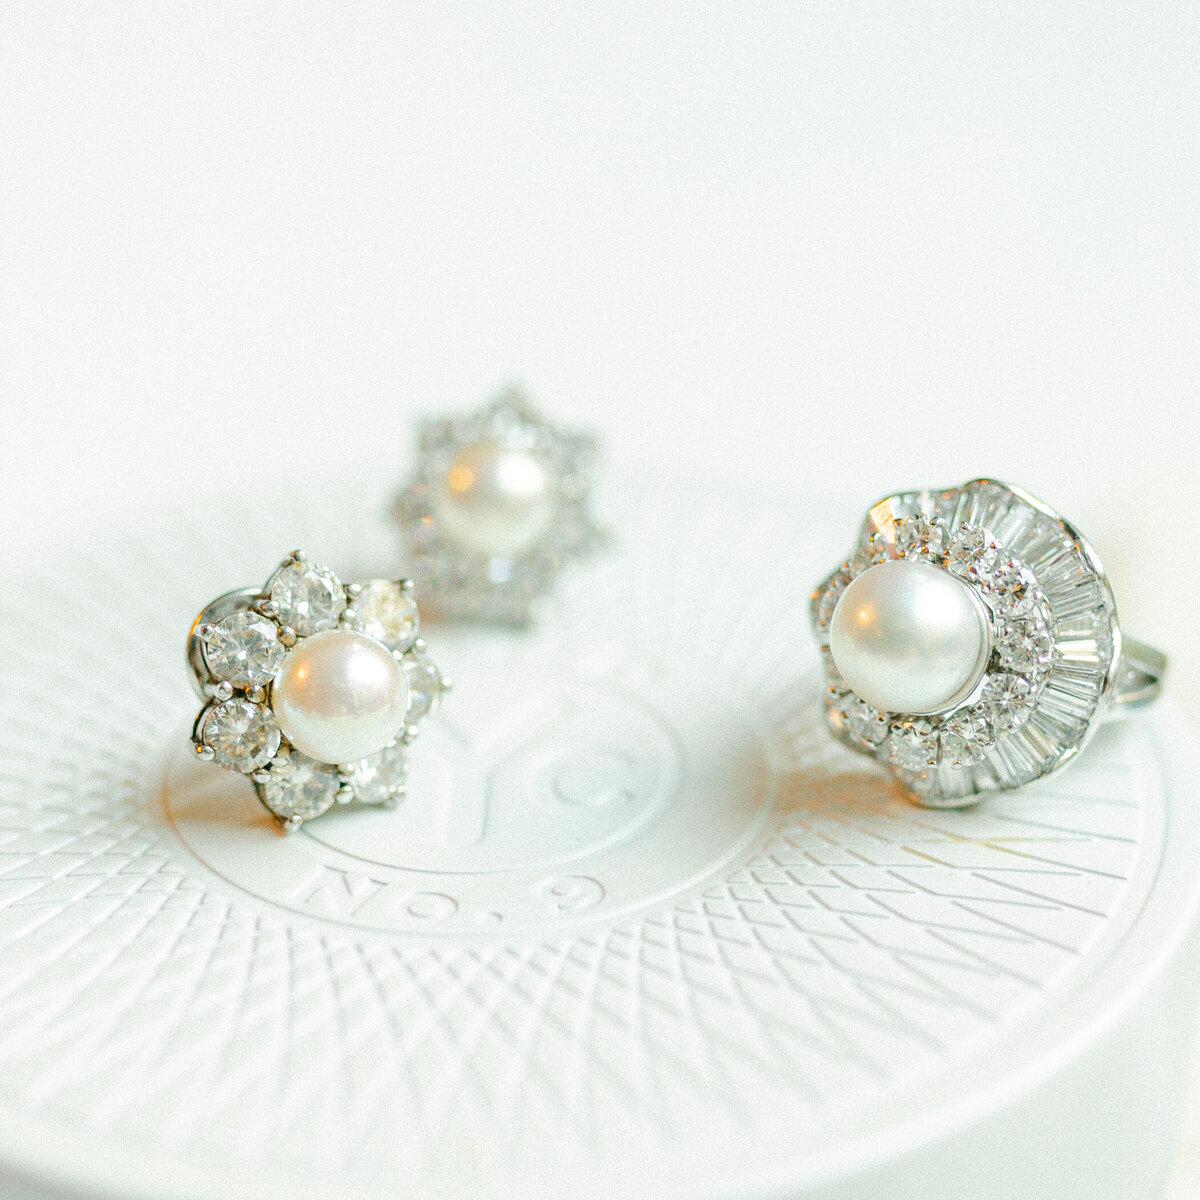 Close up detailed image of brides wedding earrings